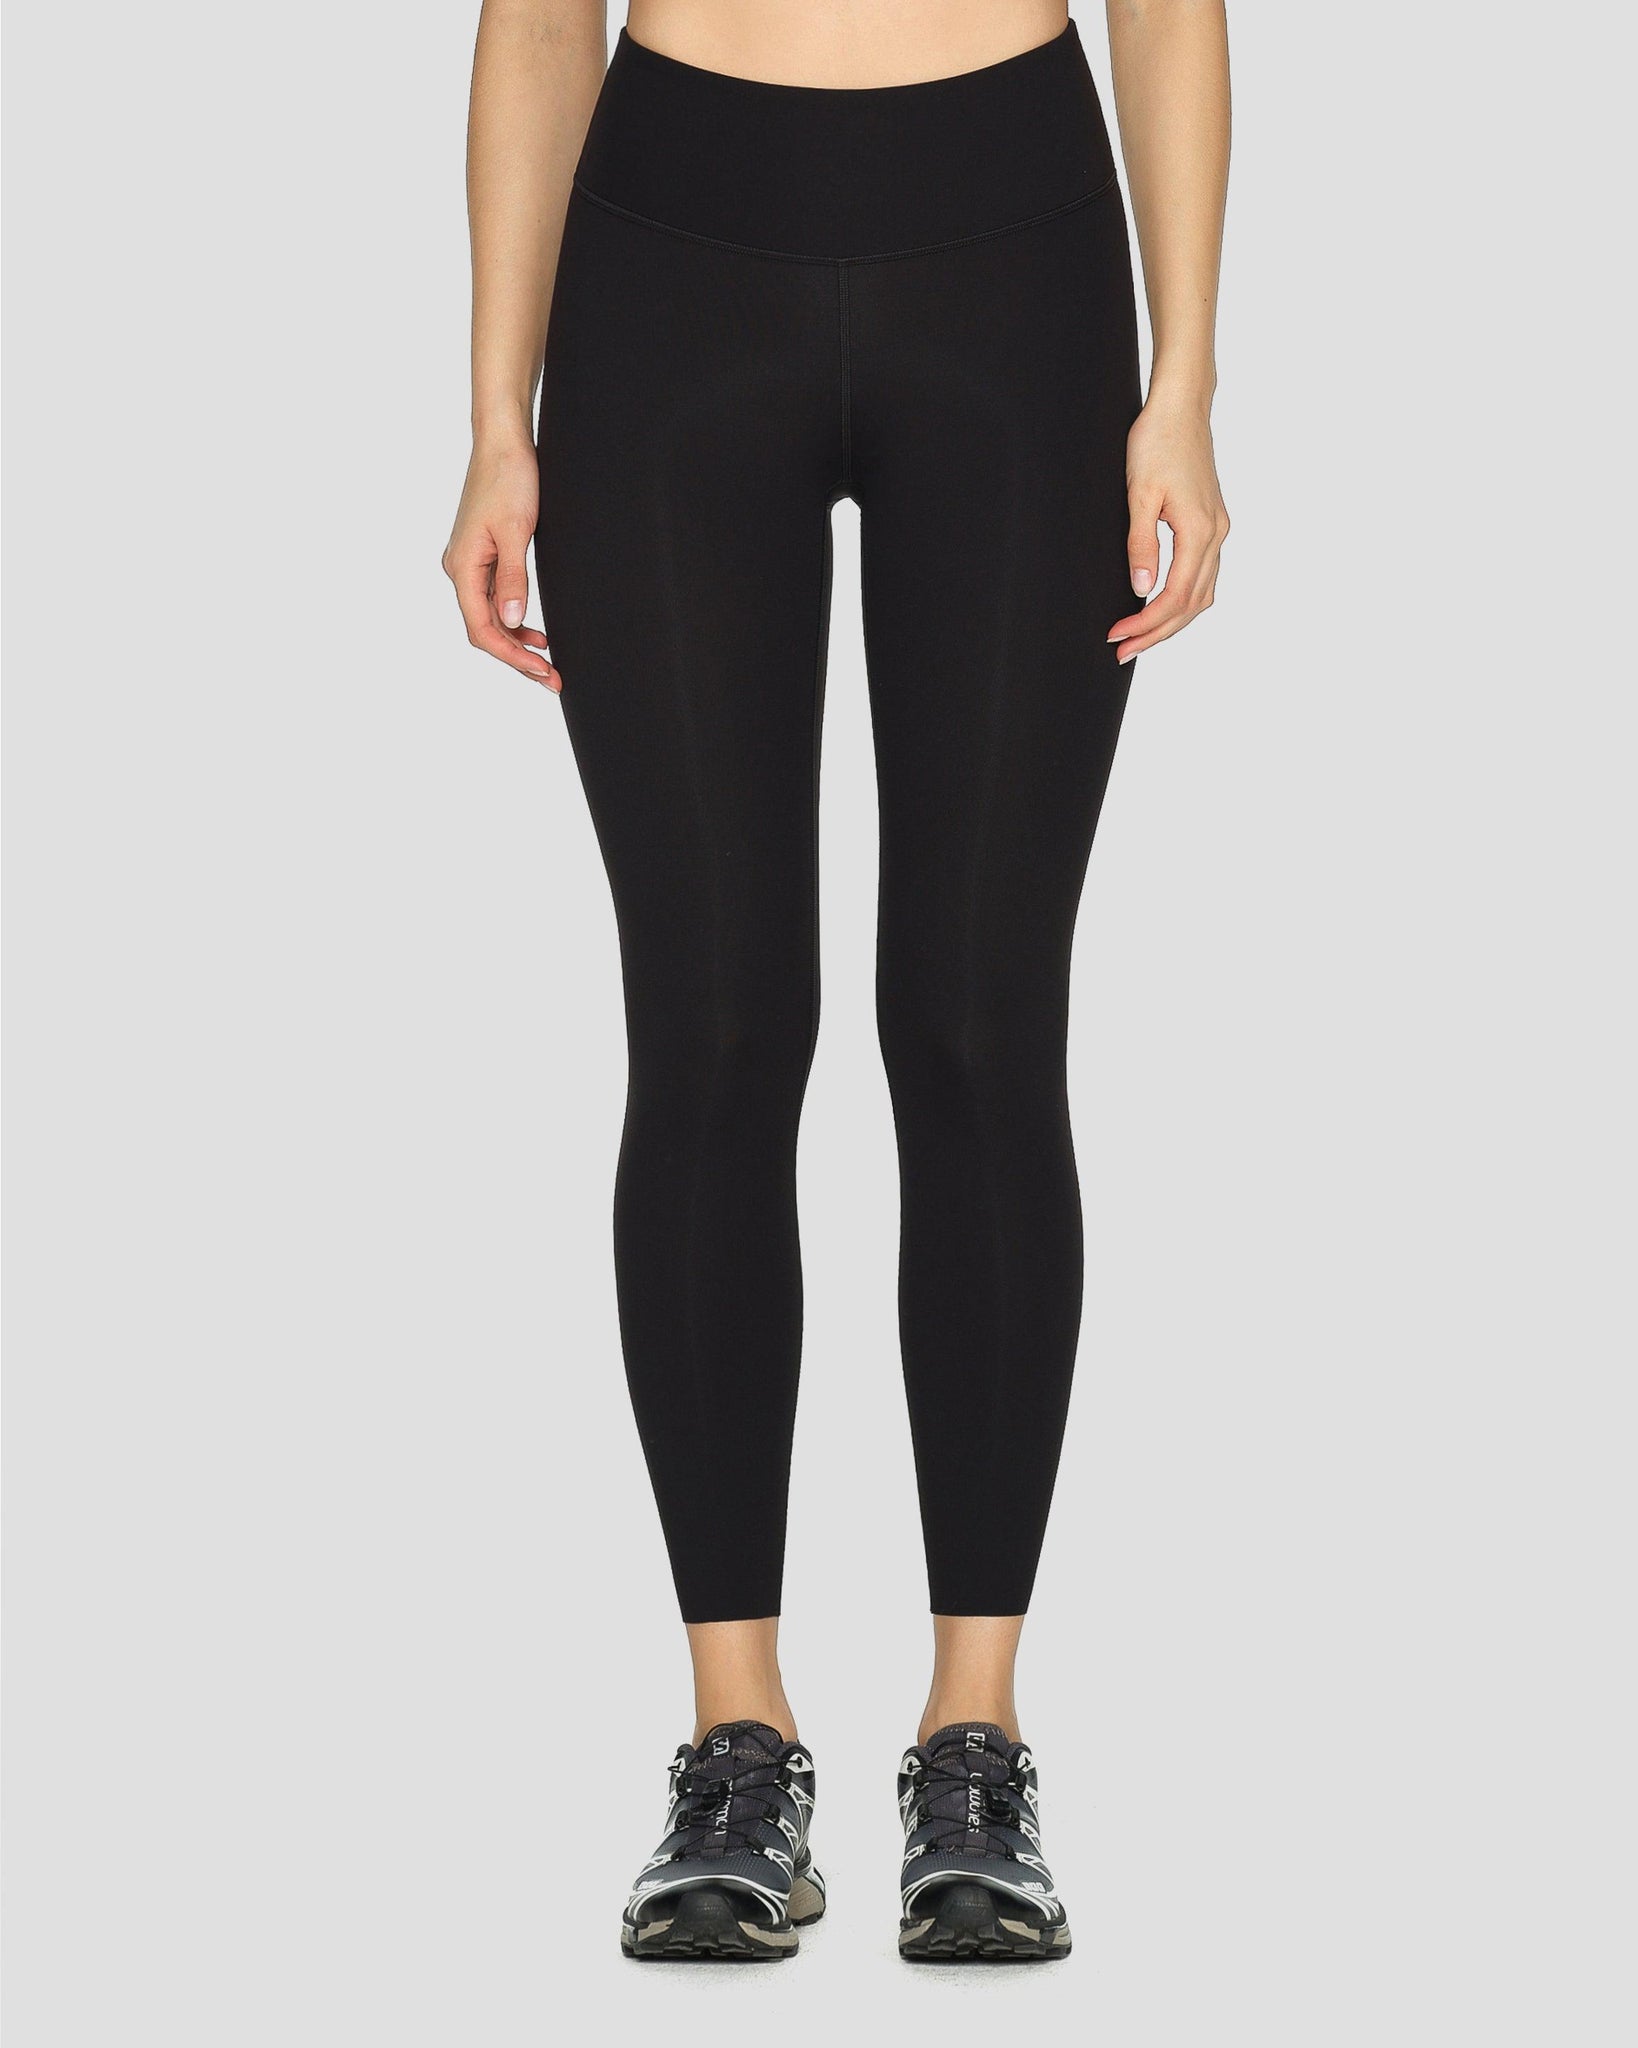 Great Athlete Essential Supportive Leggings - Gymoon